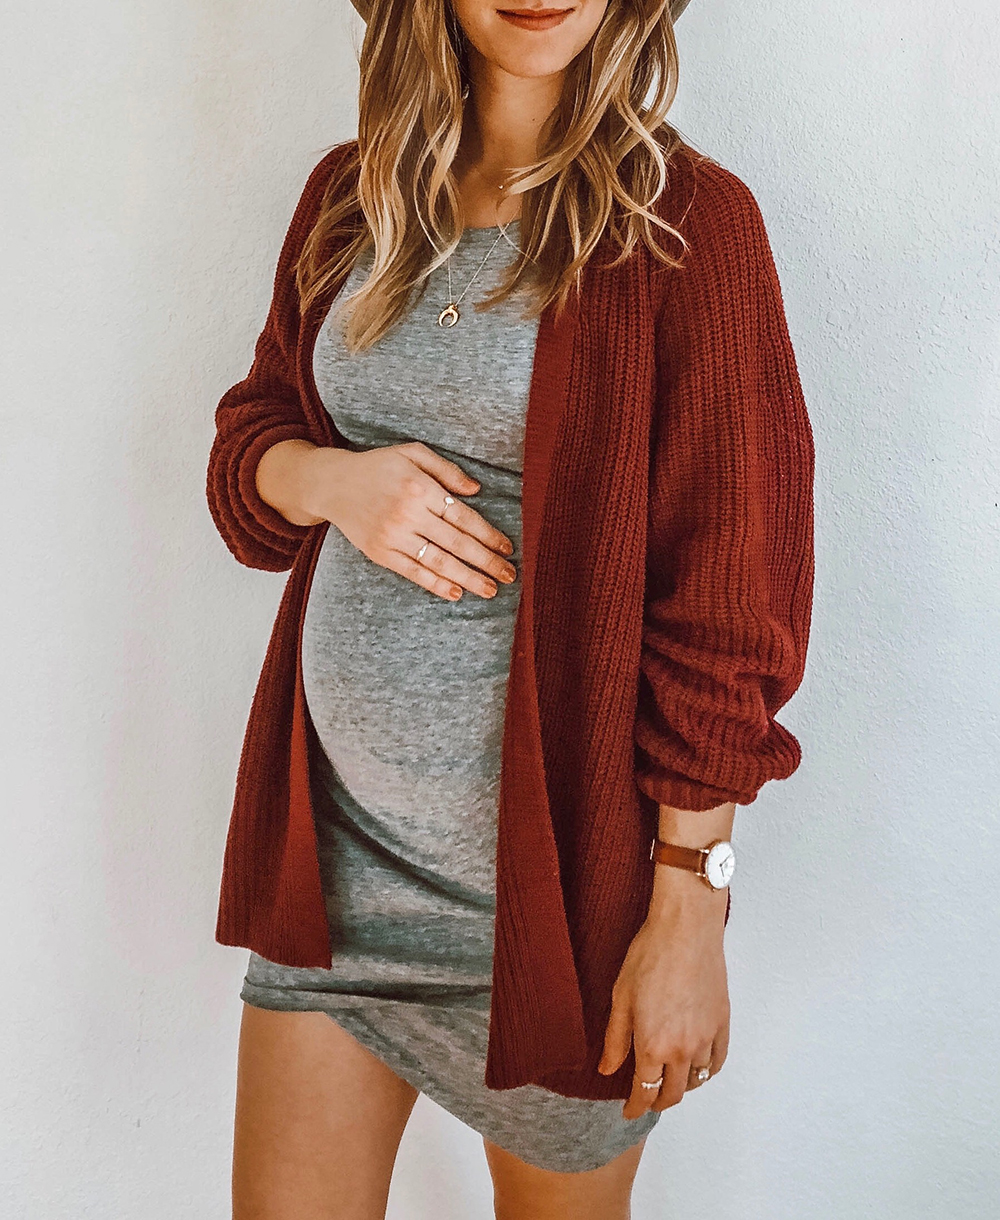 livvyland-blog-olivia-watson-best-cyber-monday-sales-leith-bodycon-dress-maternity-pregnancy-outfit-style